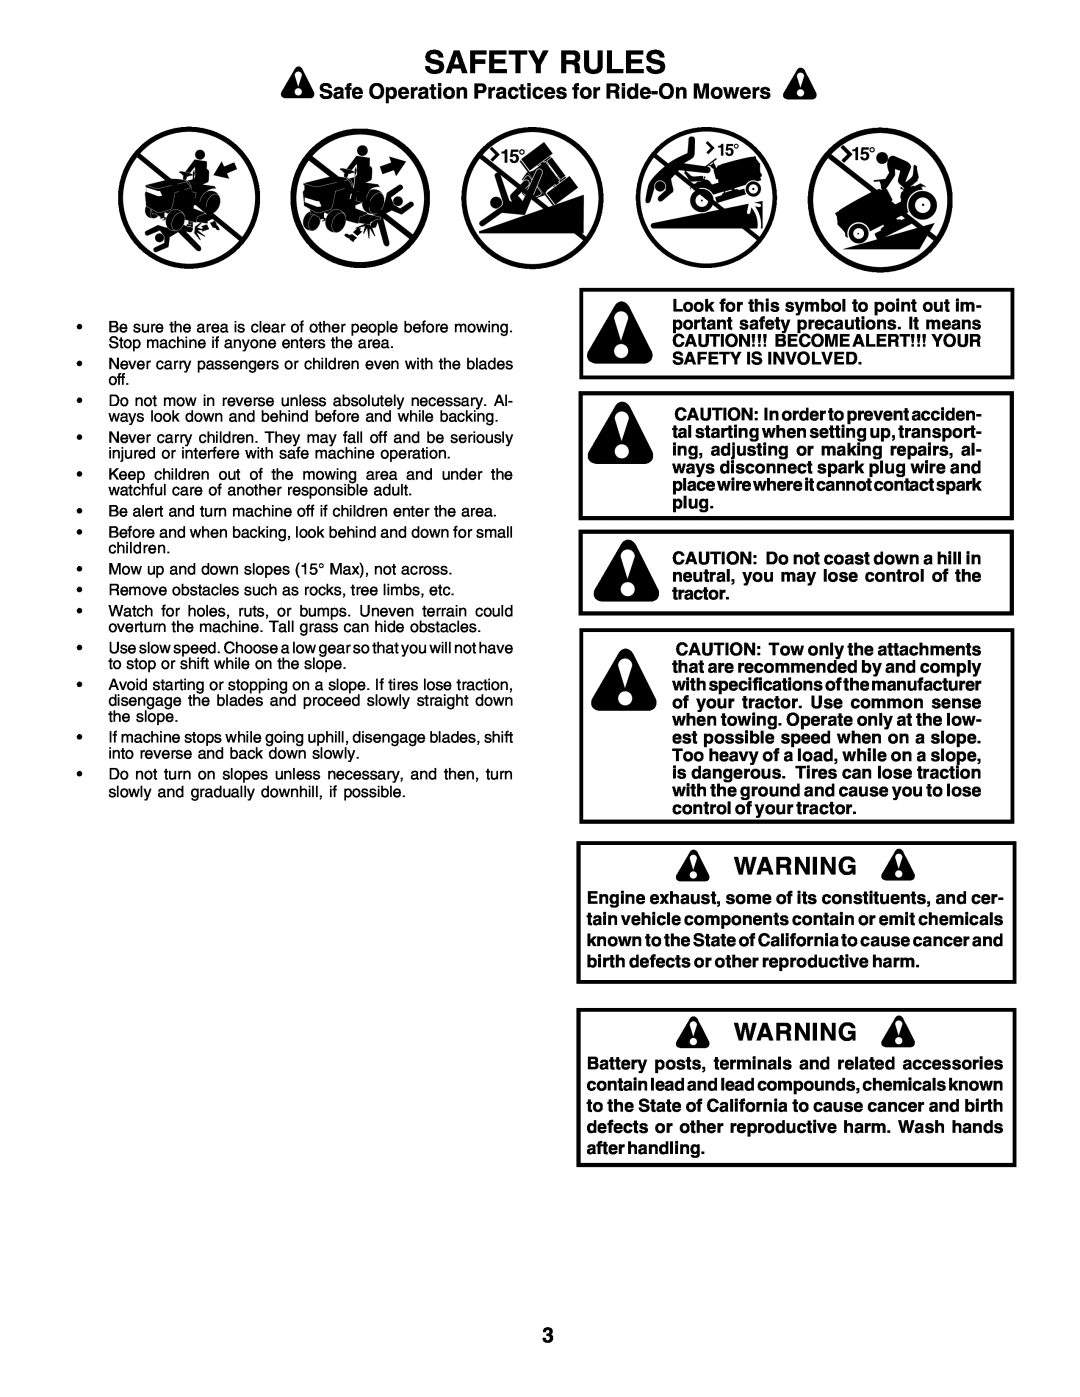 Poulan 180002 owner manual Safety Rules, Safe Operation Practices for Ride-On Mowers 